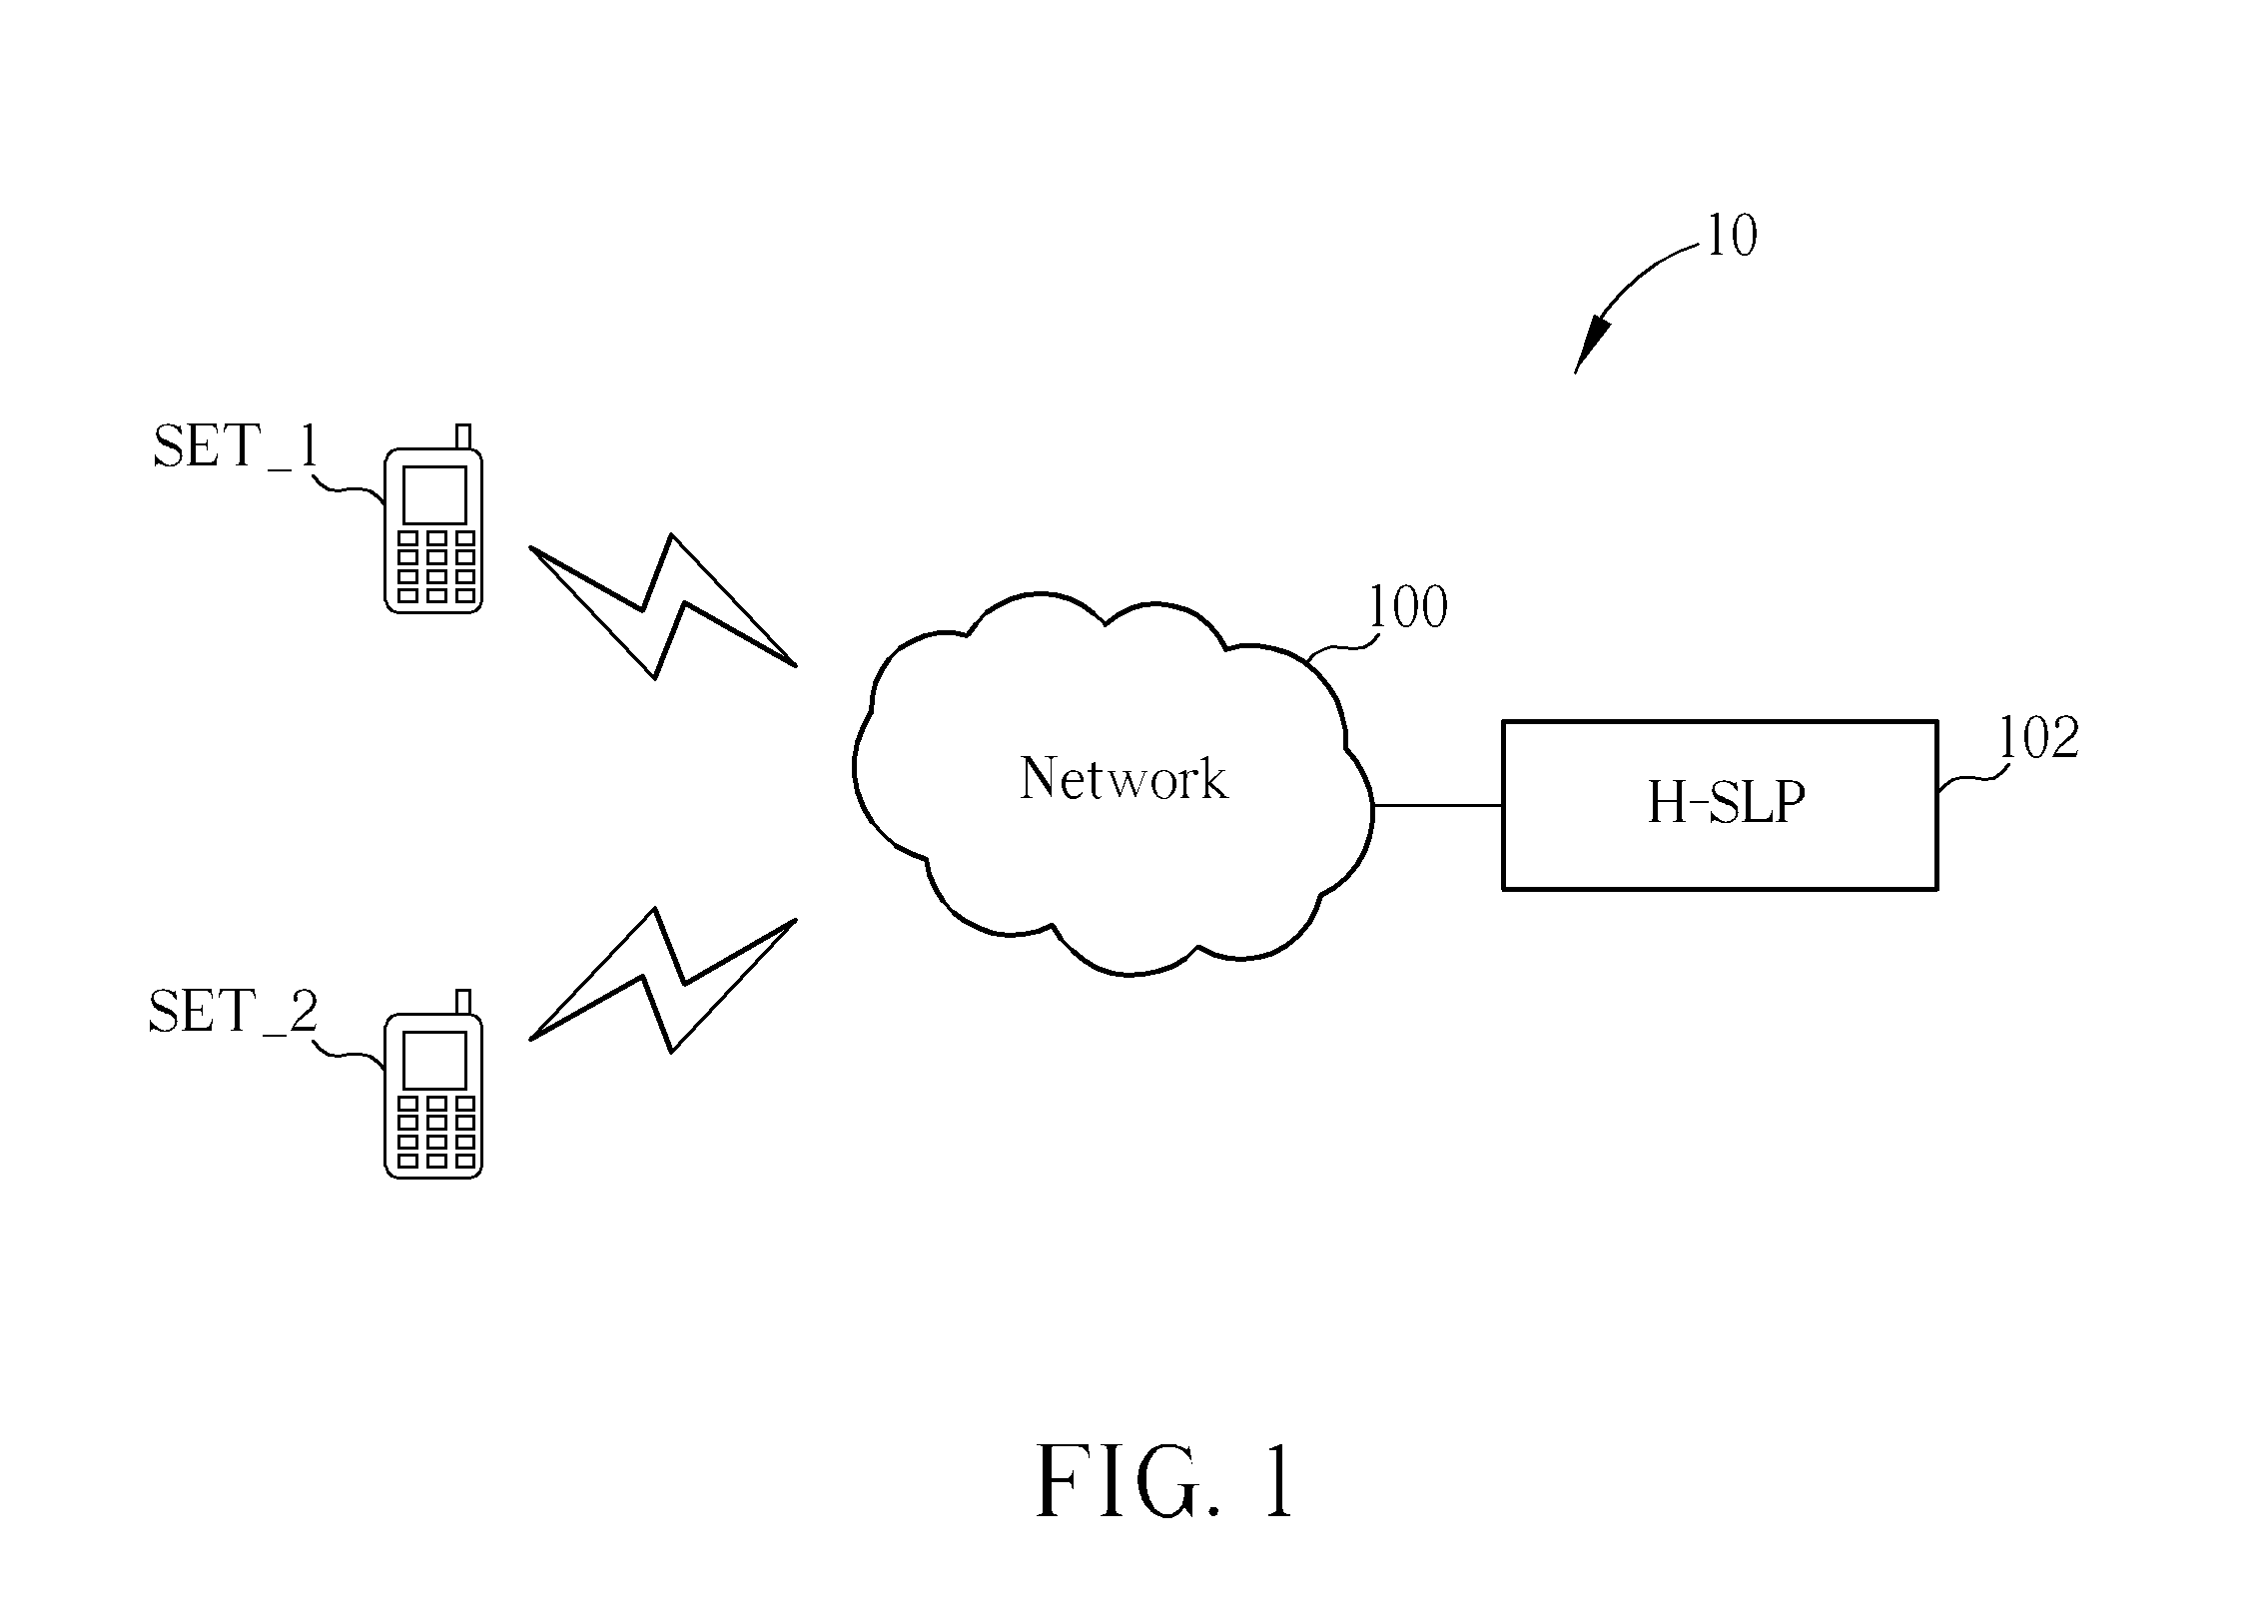 Method of SET-to-SET Location Service in a Communication System